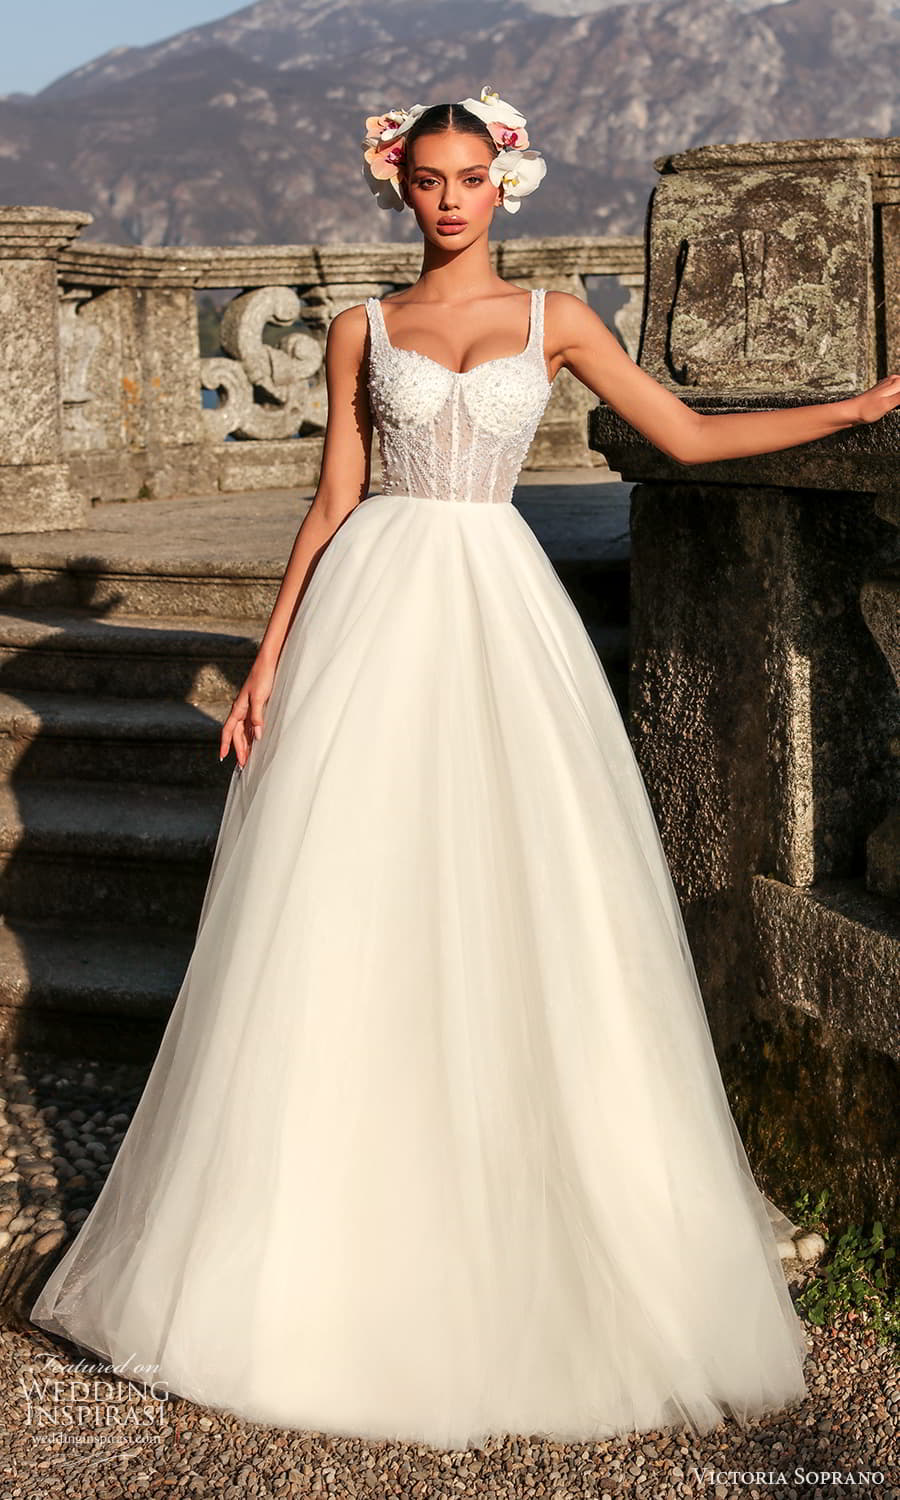 victoria soprano 2024 bridal sleeveless thick strap semi sweetheart square neckline heavily embellished bodice clean skirt a line ball gown wedding dress chapel train (28) mv